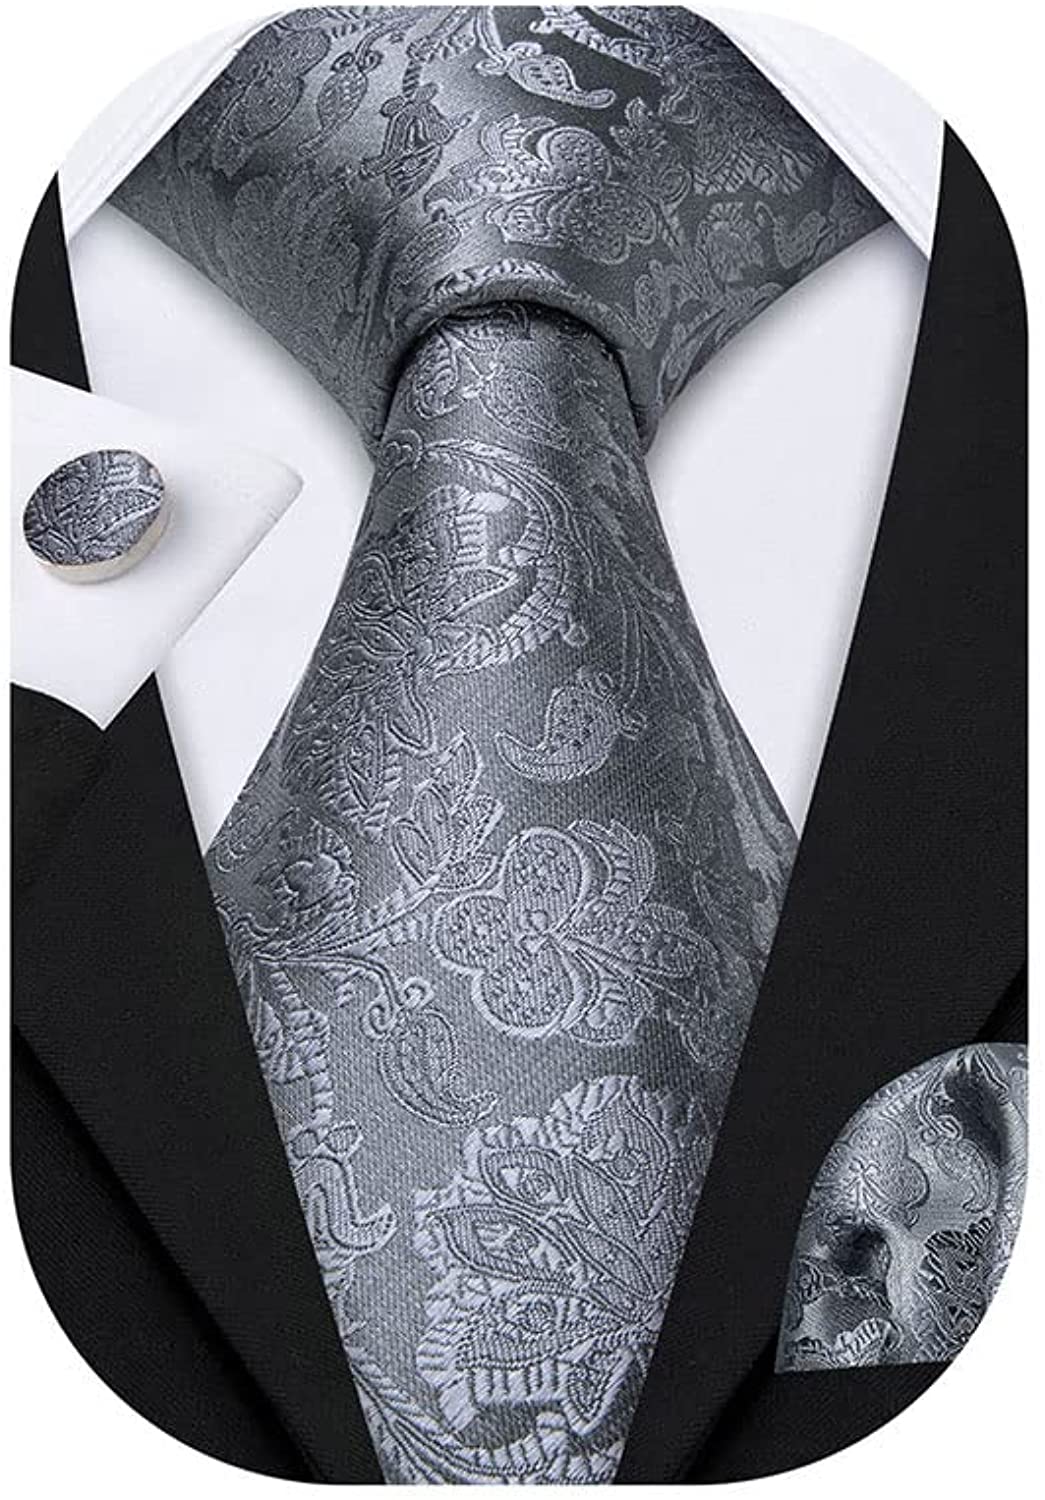 Barry.Wang Silk Men Ties,Paisley Necktie Pocket Square and Cufflinks Set  for Wed | eBay